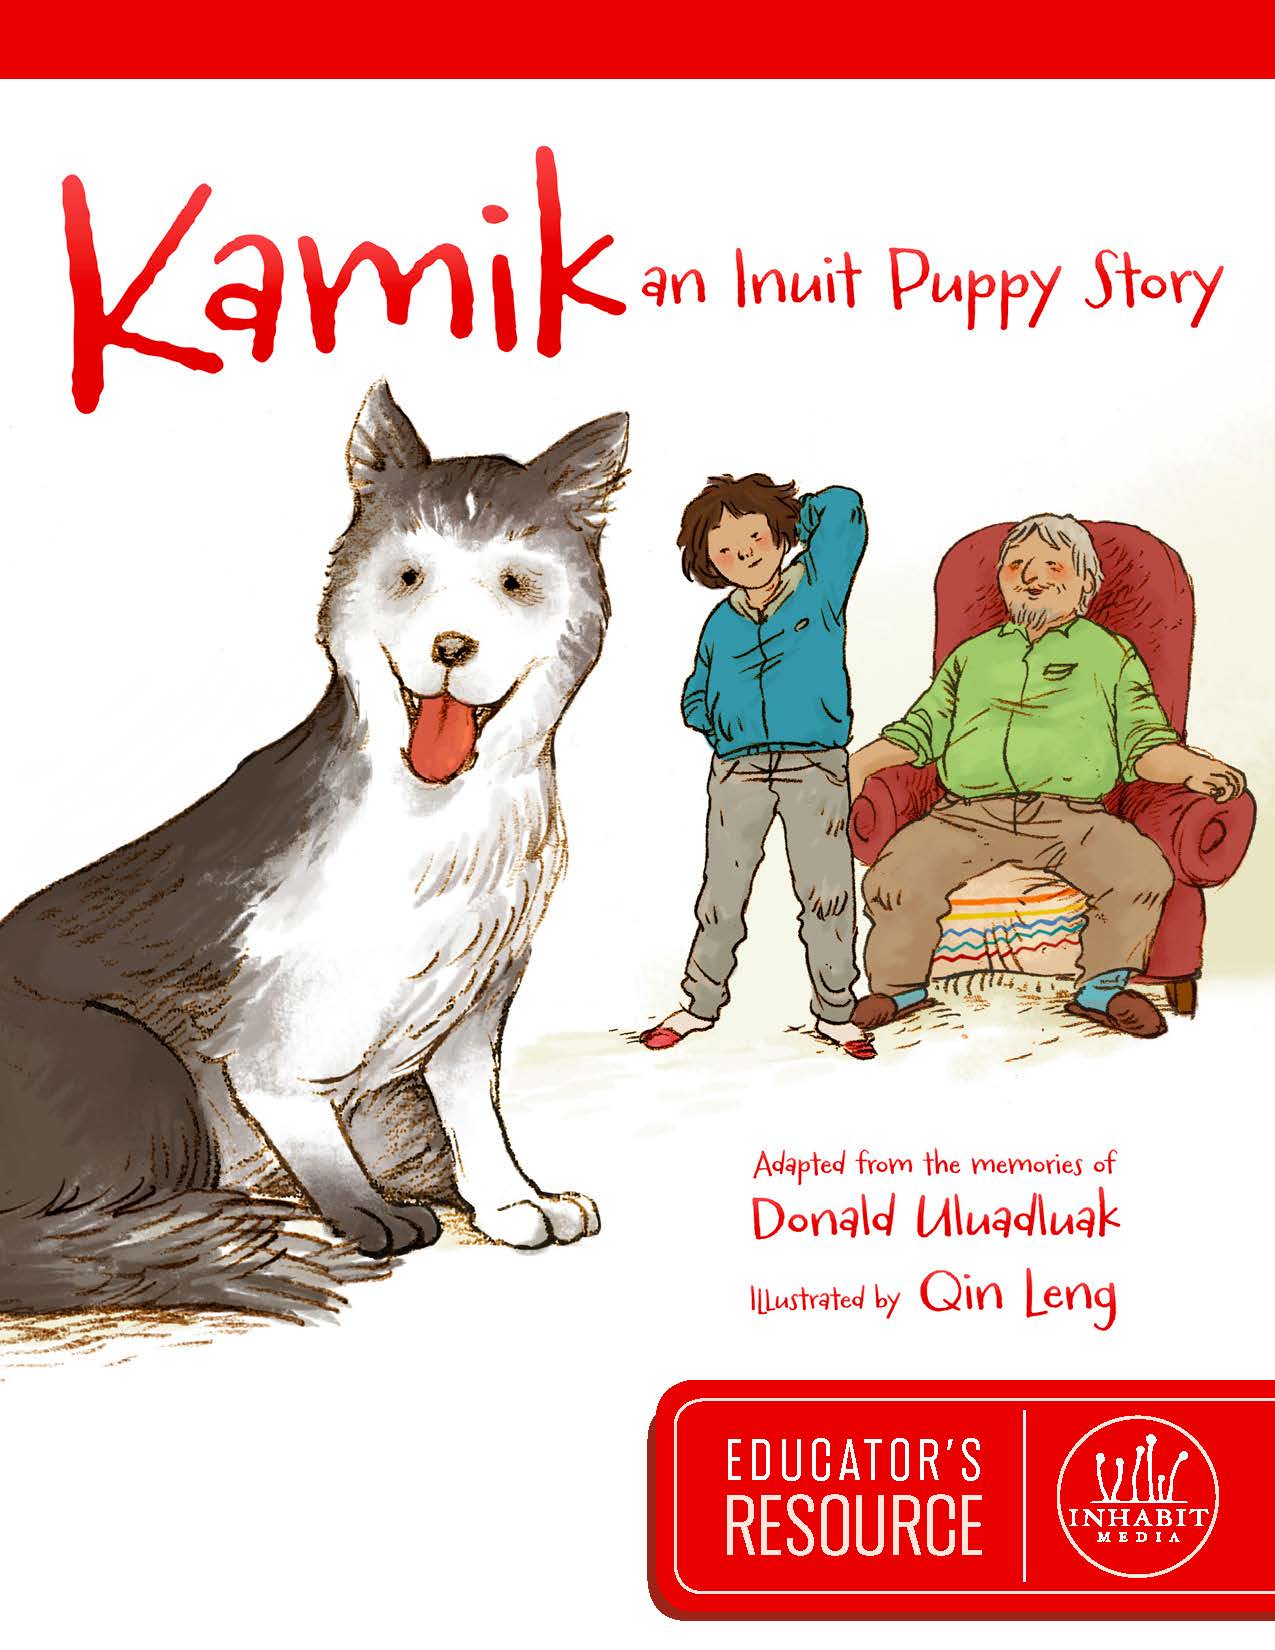 Kamik: An Inuit Puppy Story Educator's Resource